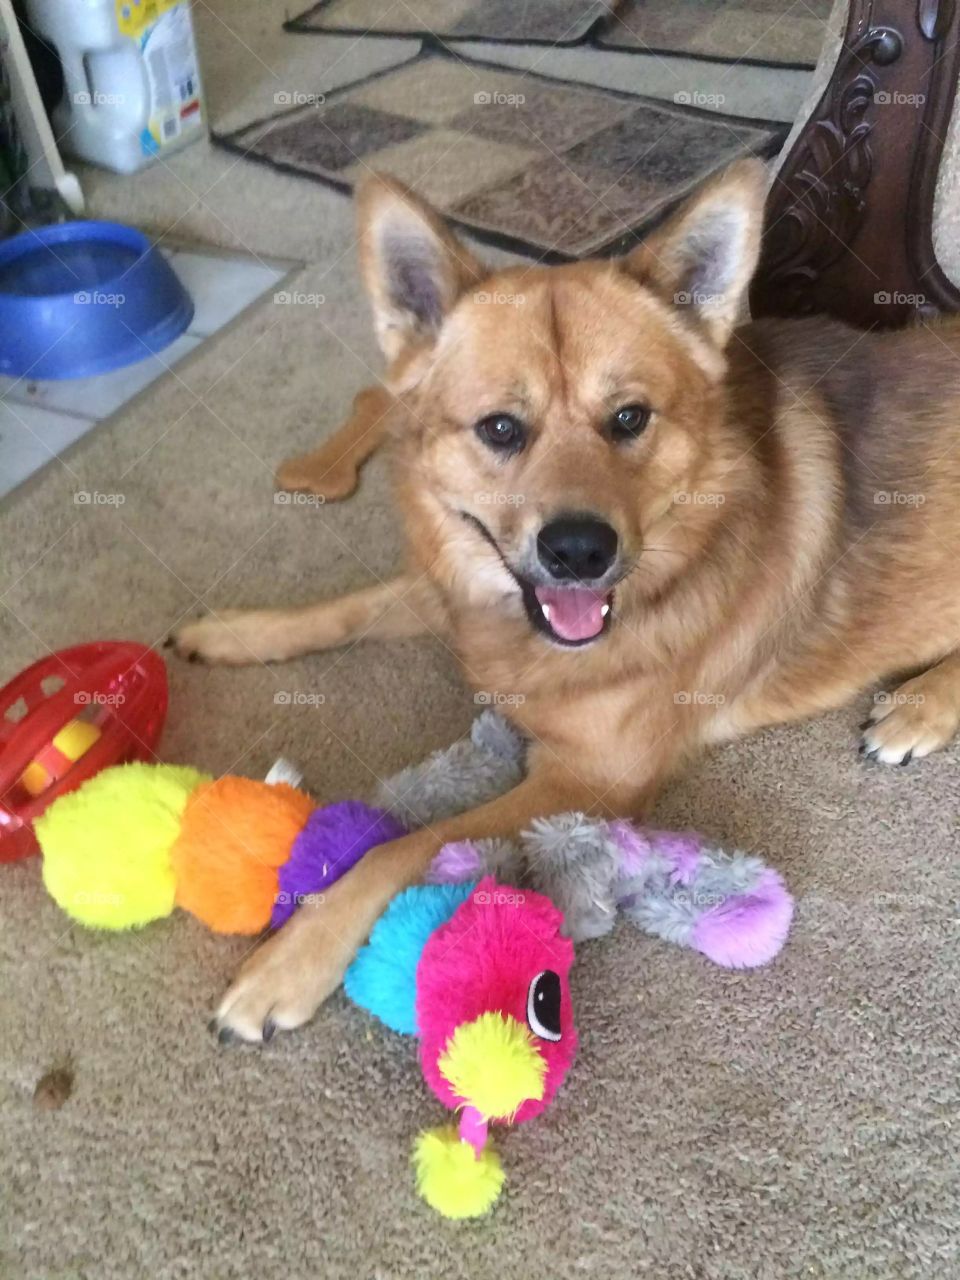 From living on the streets, to the shelter, & finally to his forever home, Jax loves his toys & family